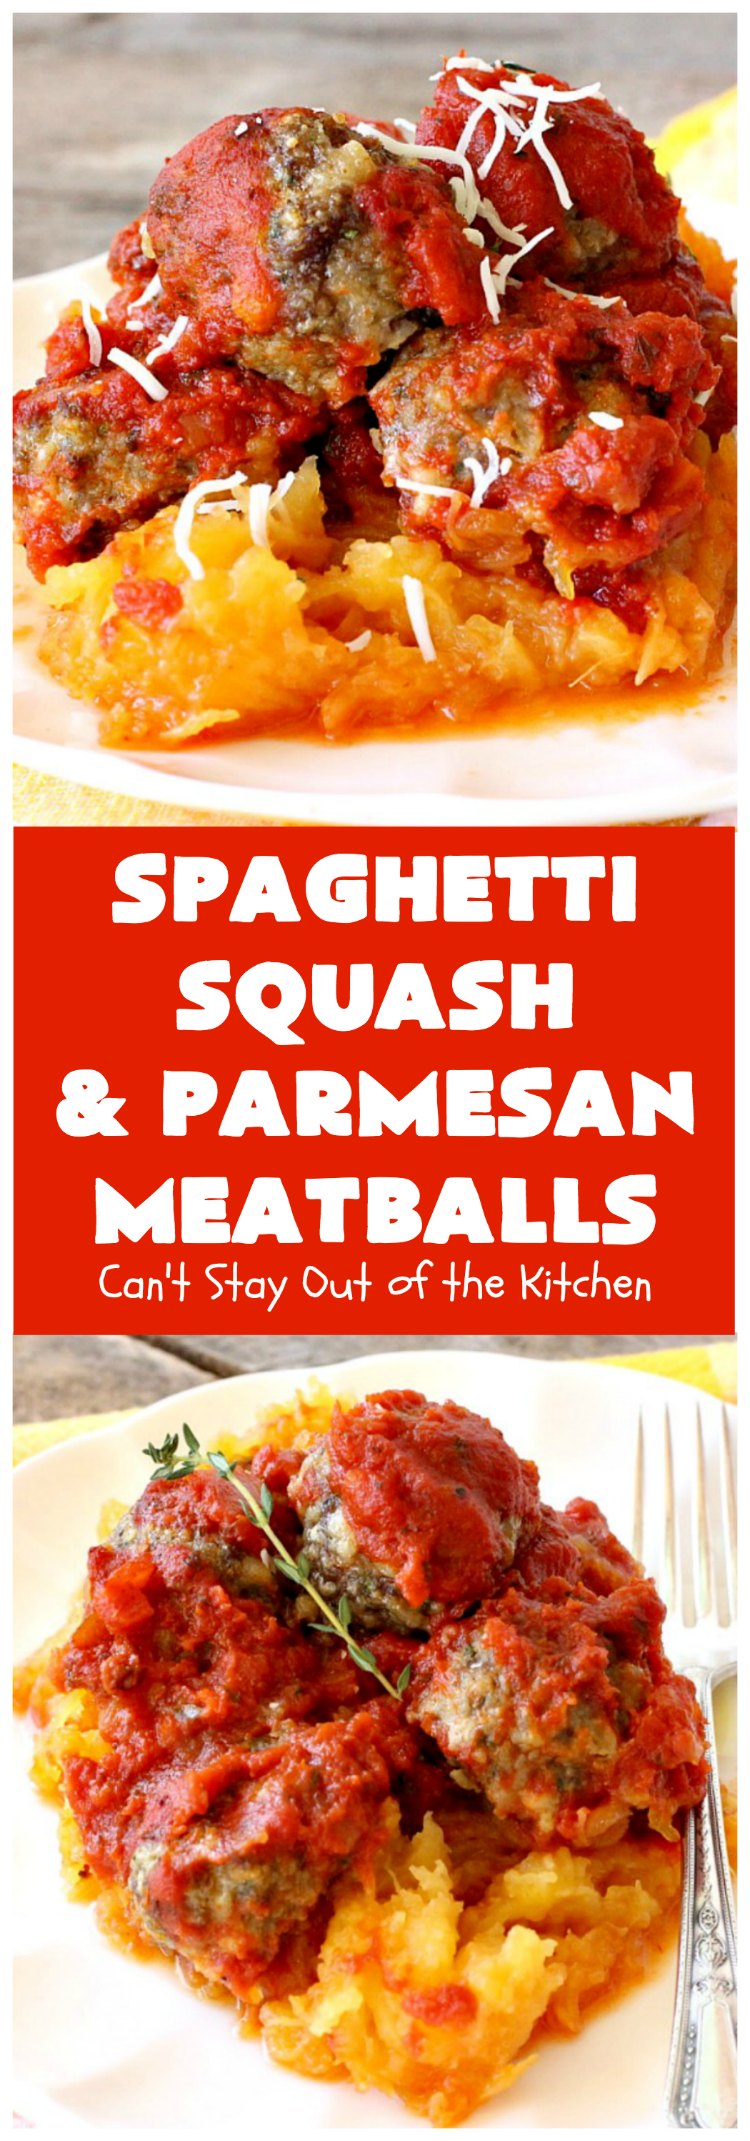 Spaghetti Squash and Parmesan Meatballs | Can't Stay Out of the Kitchen | fantastic #healthy & #LowCalorie #casserole with #SpaghettisSquash instead of pasta. Uses #spaghetti sauce & homemade #GlutenFree #meatballs with #ParmesanCheese. Easy & delicious. #beef #GroundBeef #SpaghettiSquashAndParmesanMeatballs